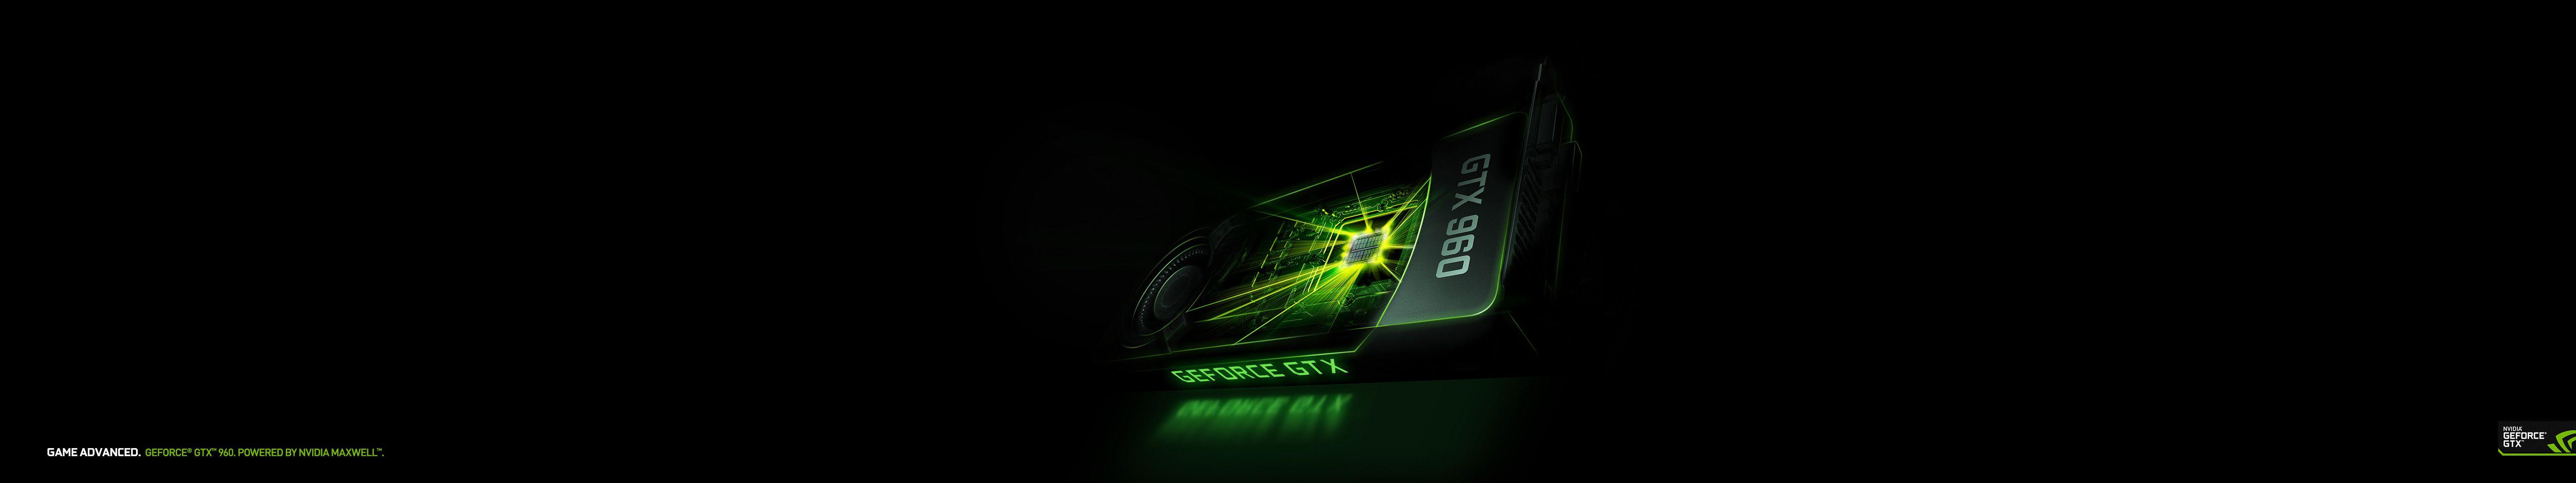 5760 X 1080 Nvidia Wallpapers Top Free 5760 X 1080 Nvidia Backgrounds Wallpaperaccess